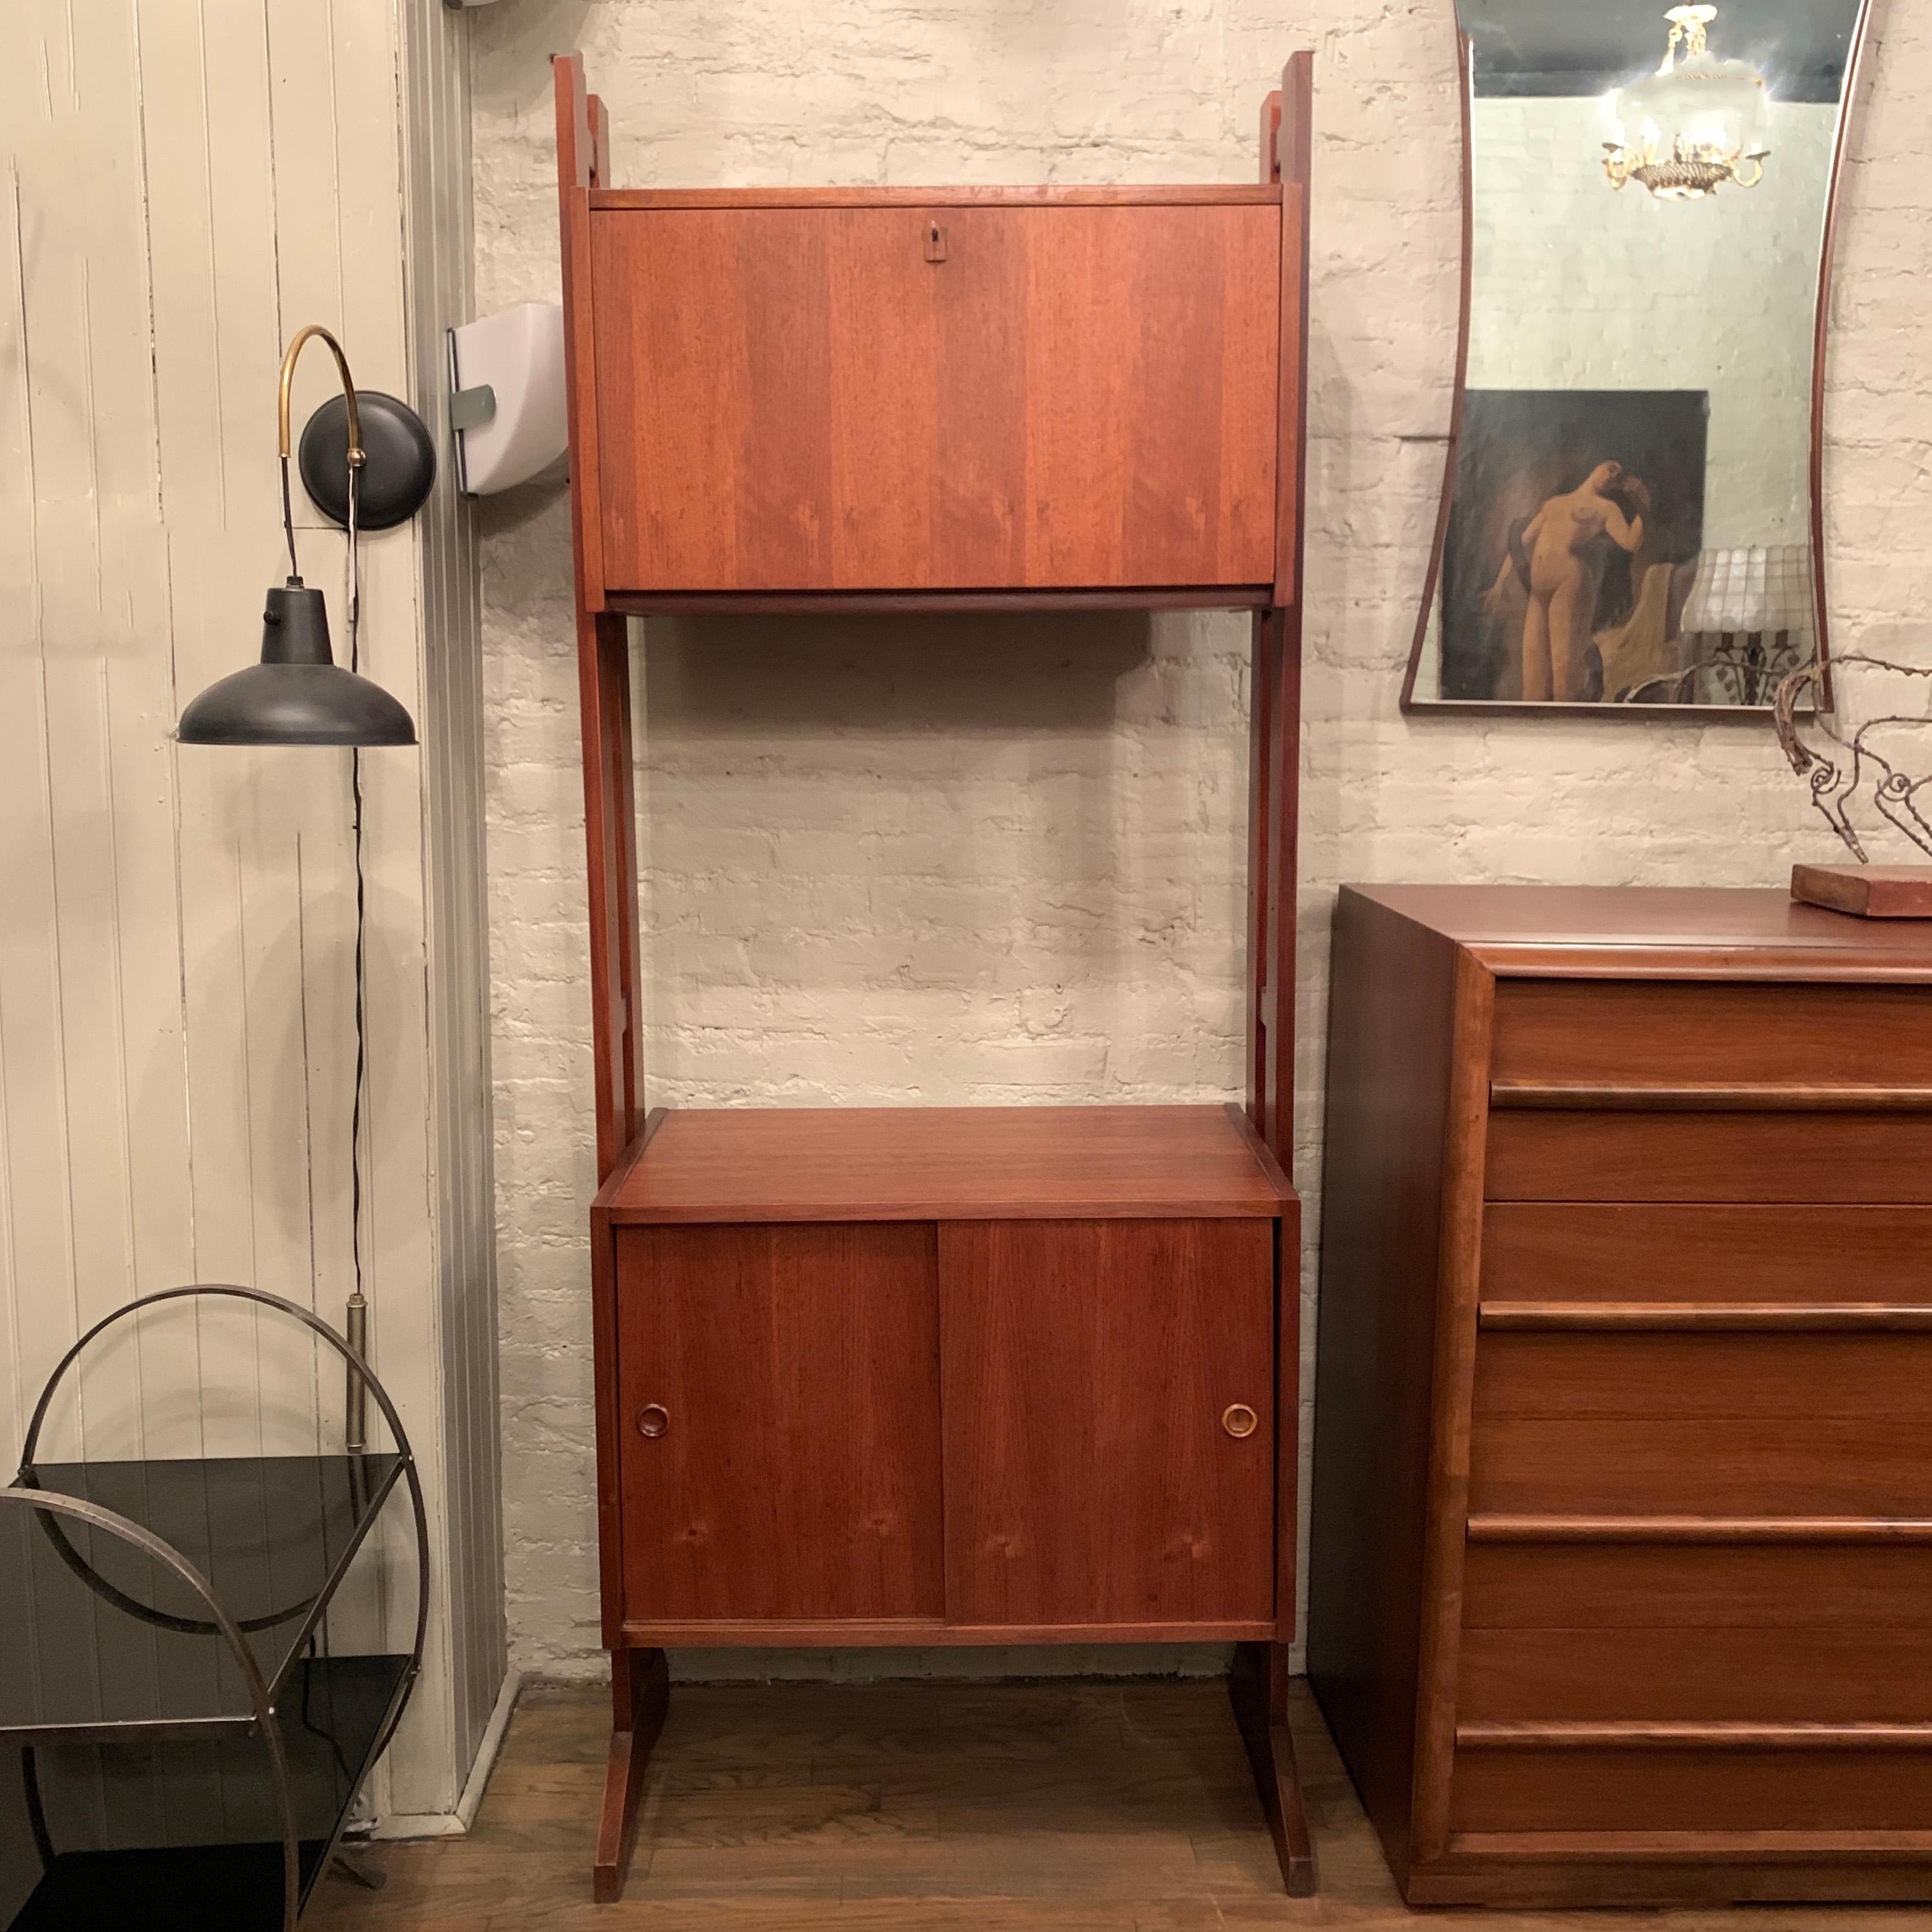 Mid-Century Modern, free standing, walnut, wall unit features divided vinyl record storage on the bottom and a locked top cabinet. The bottom cabinet's height is 18 inches and the top cabinet is 13 inches deep and 15.5 inches height so records can